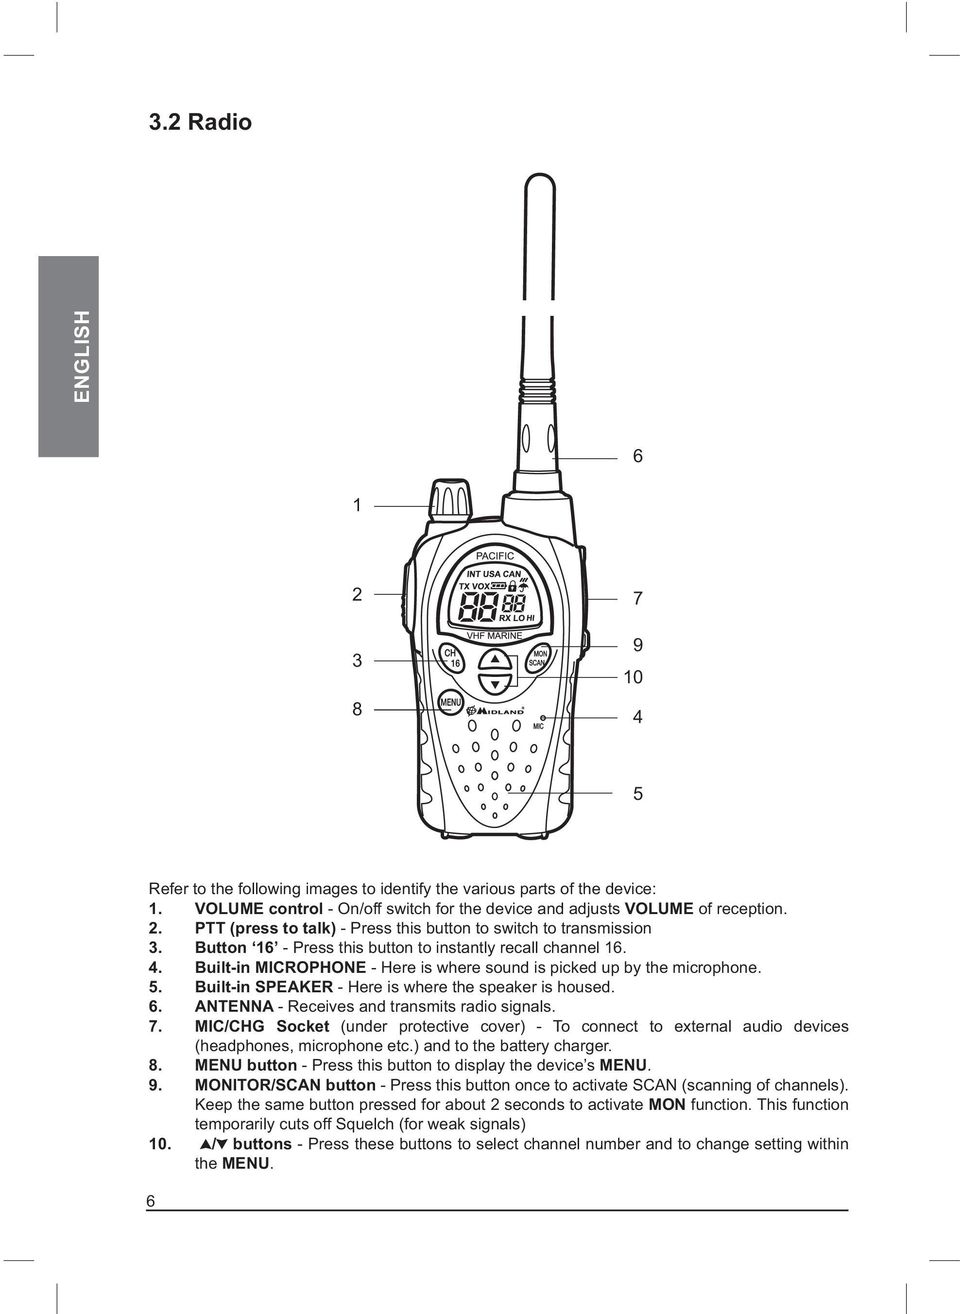 ANTENNA - Receives and transmits radio signals. 7. MIC/CHG Socket (under protective cover) - To connect to external audio devices (headphones, microphone etc.) and to the battery charger. 8.